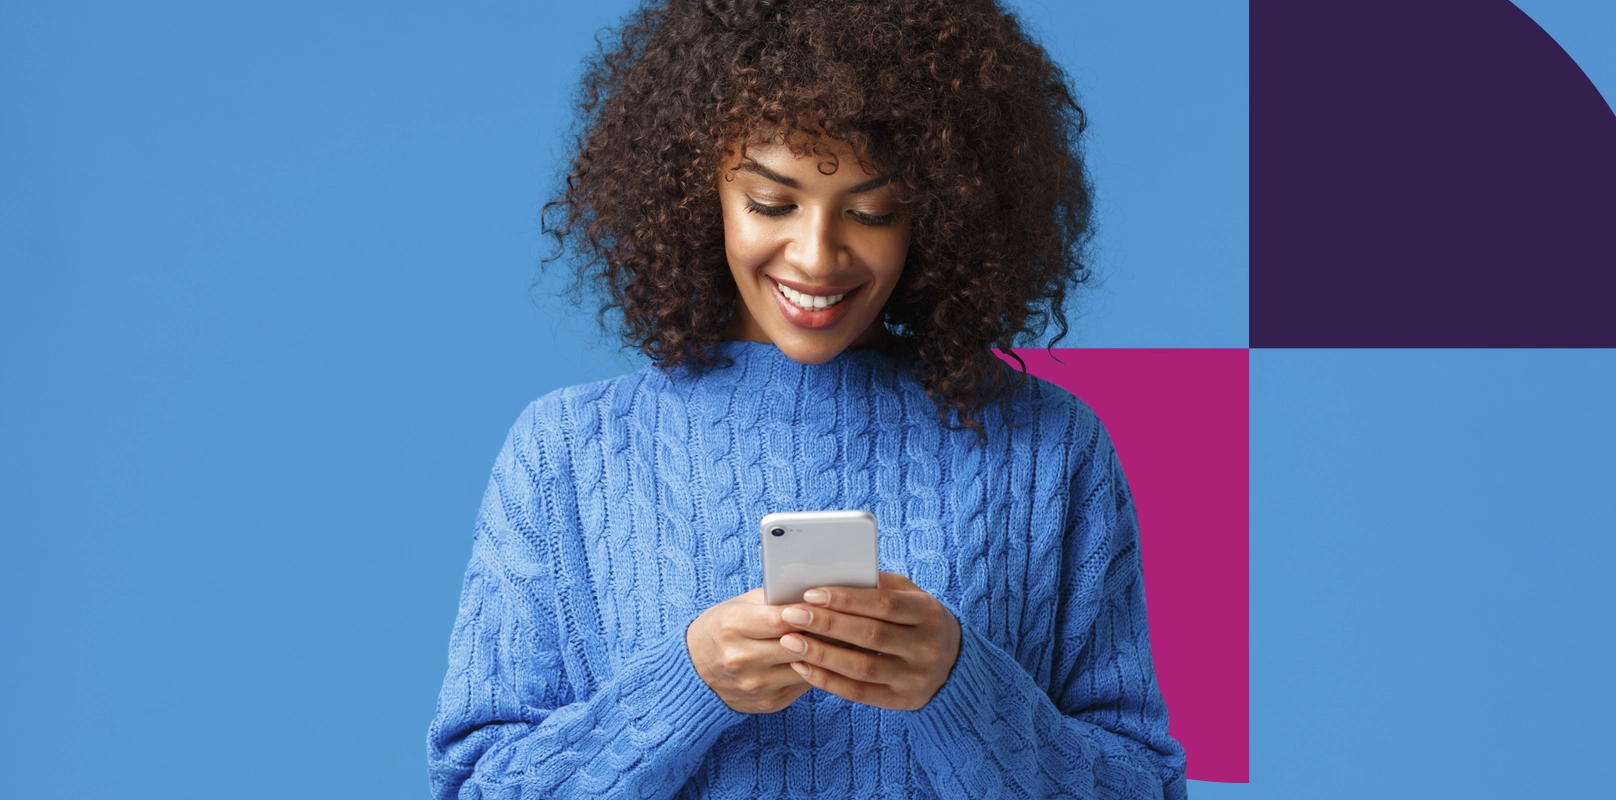 Smiling woman using mobile phone against blue background